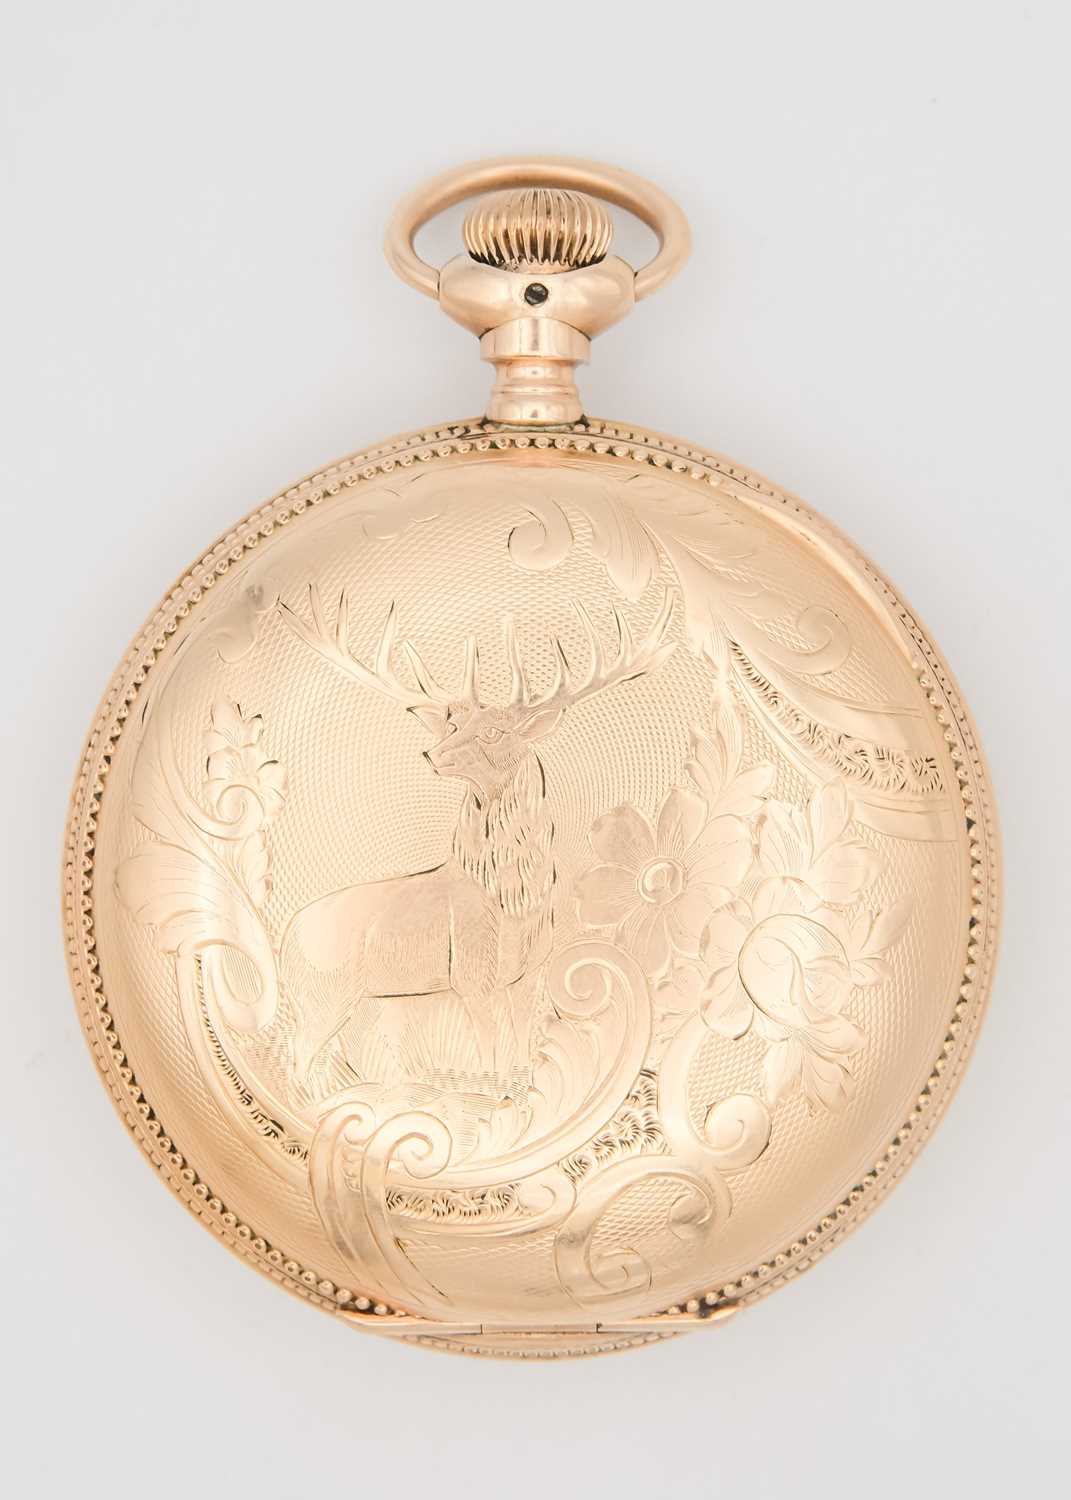 HAMPDEN WATCH CO. - A large rose gold plated full hunter crown wind pocket watch. - Image 4 of 6